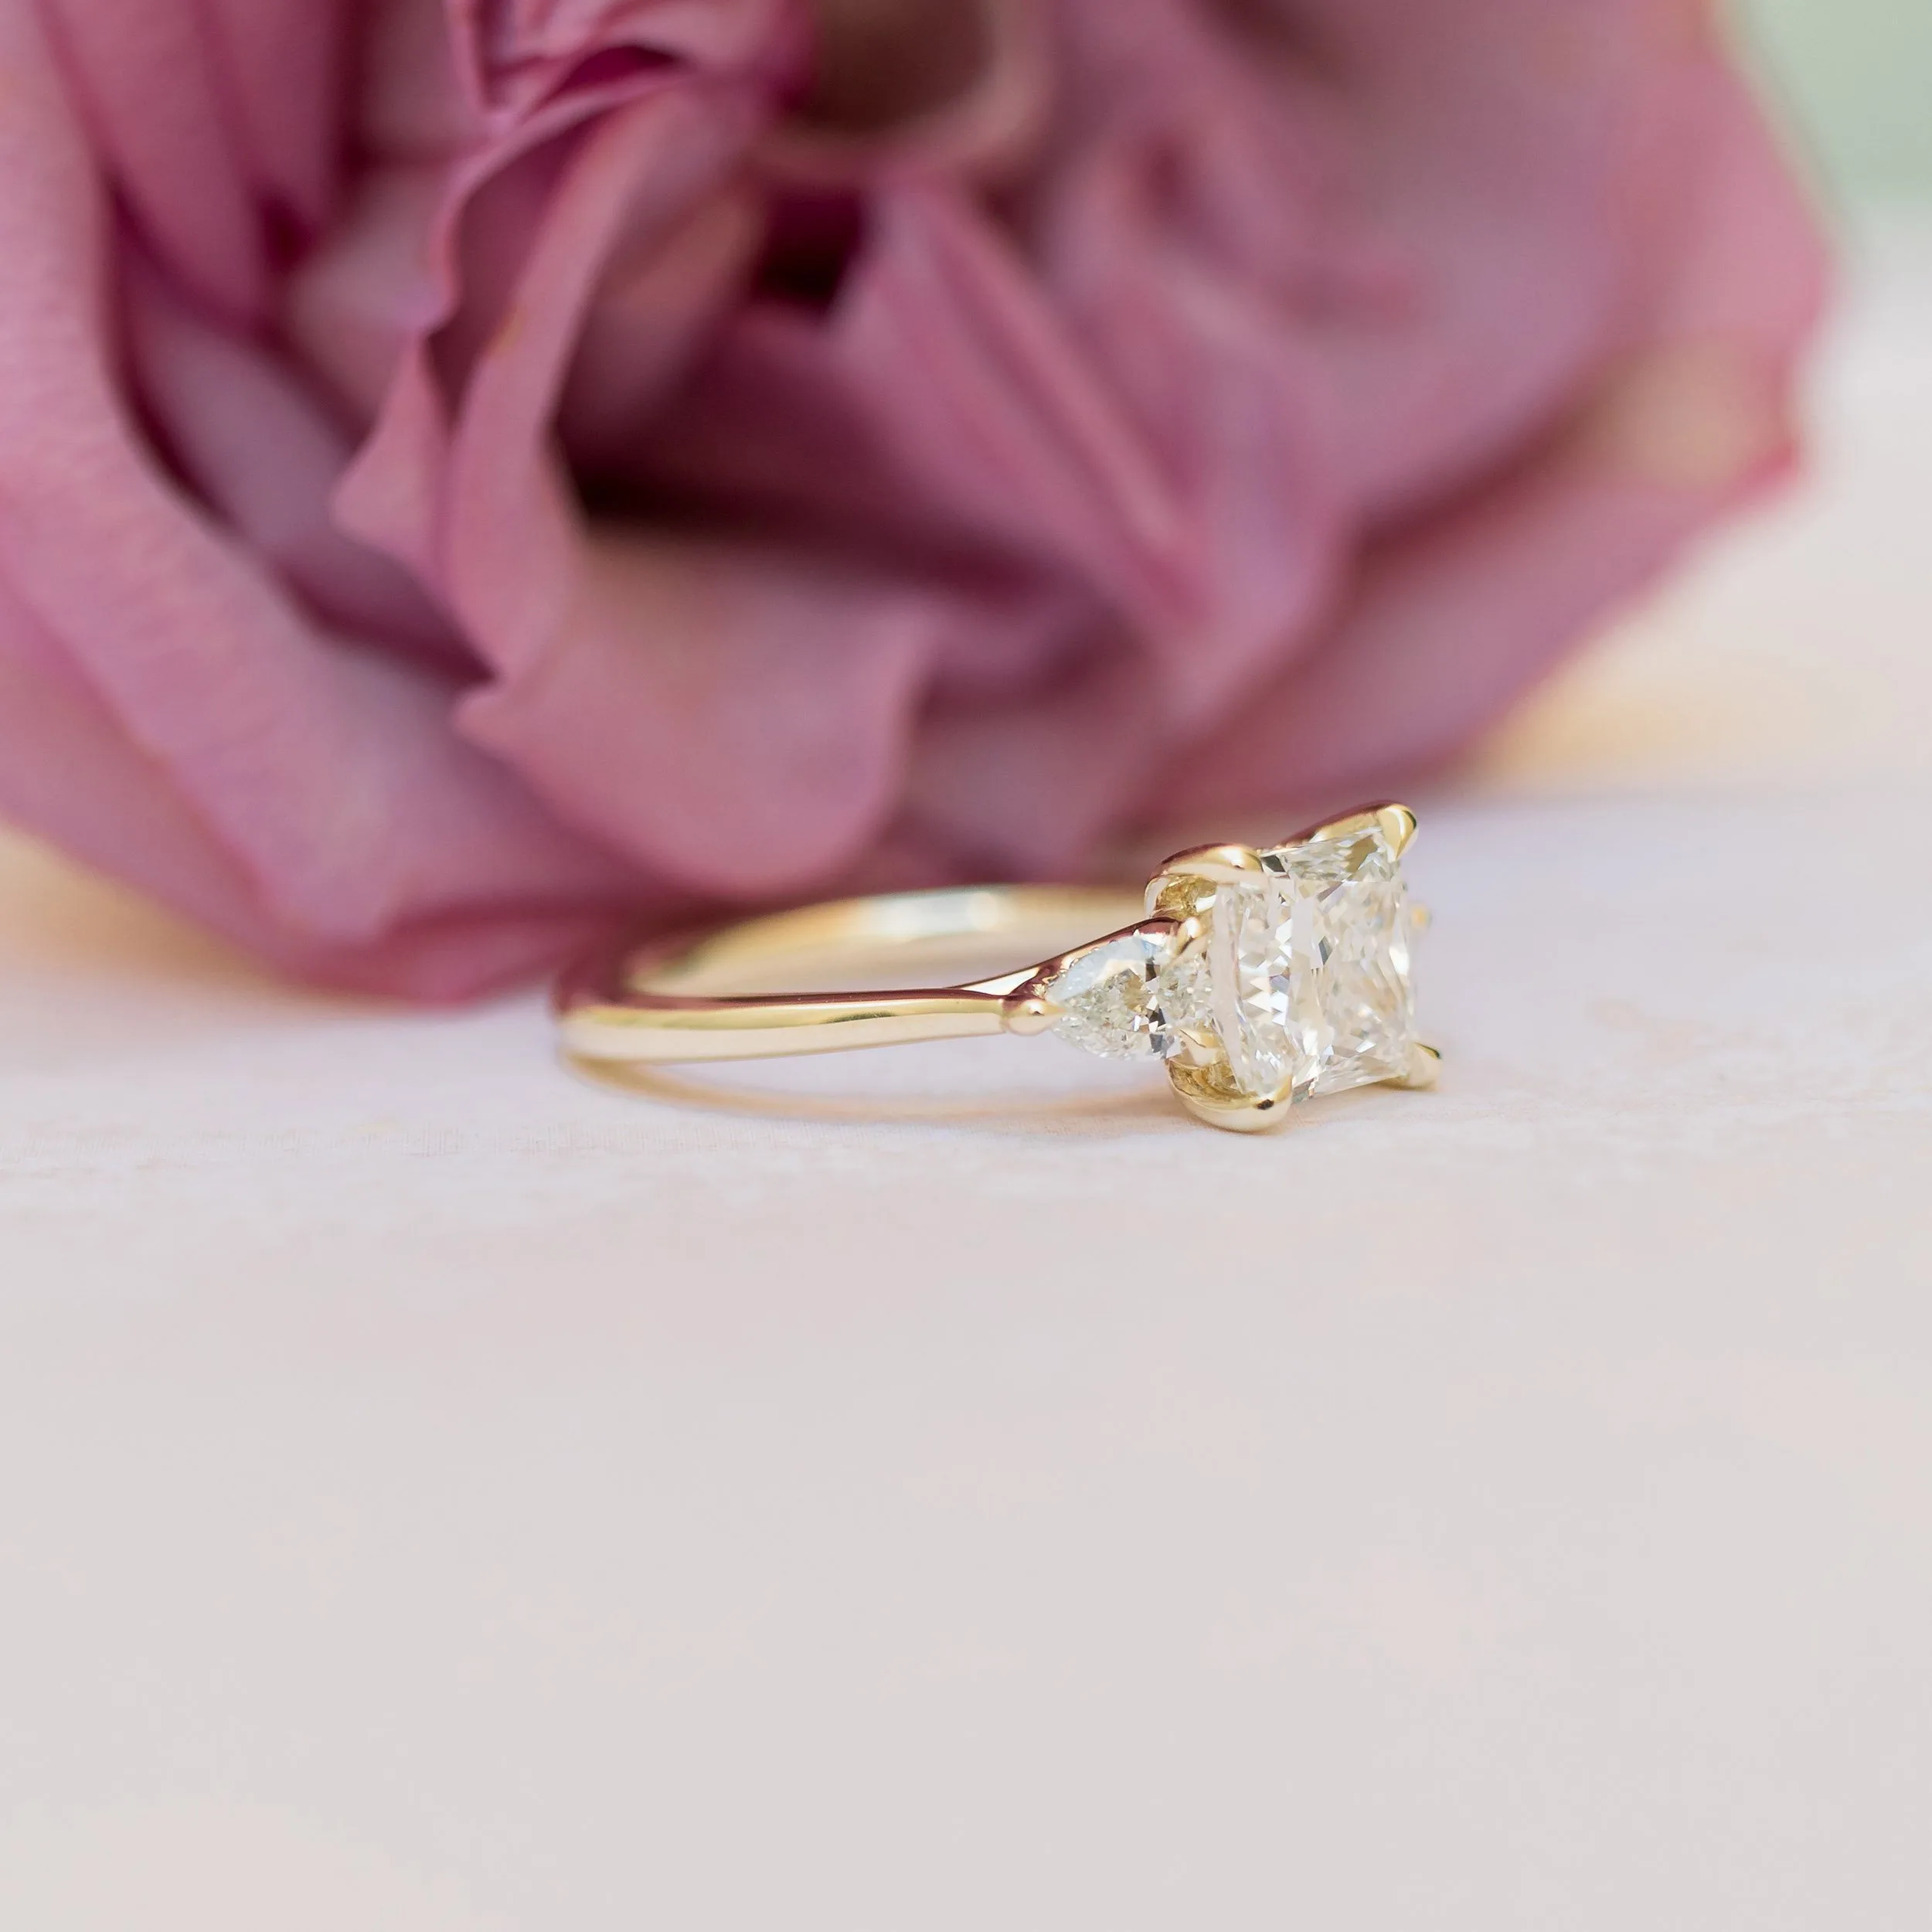 High Quality 1.75 ct Lab Diamonds set in 14k Yellow Gold Princess and Pear Setting (Side View)